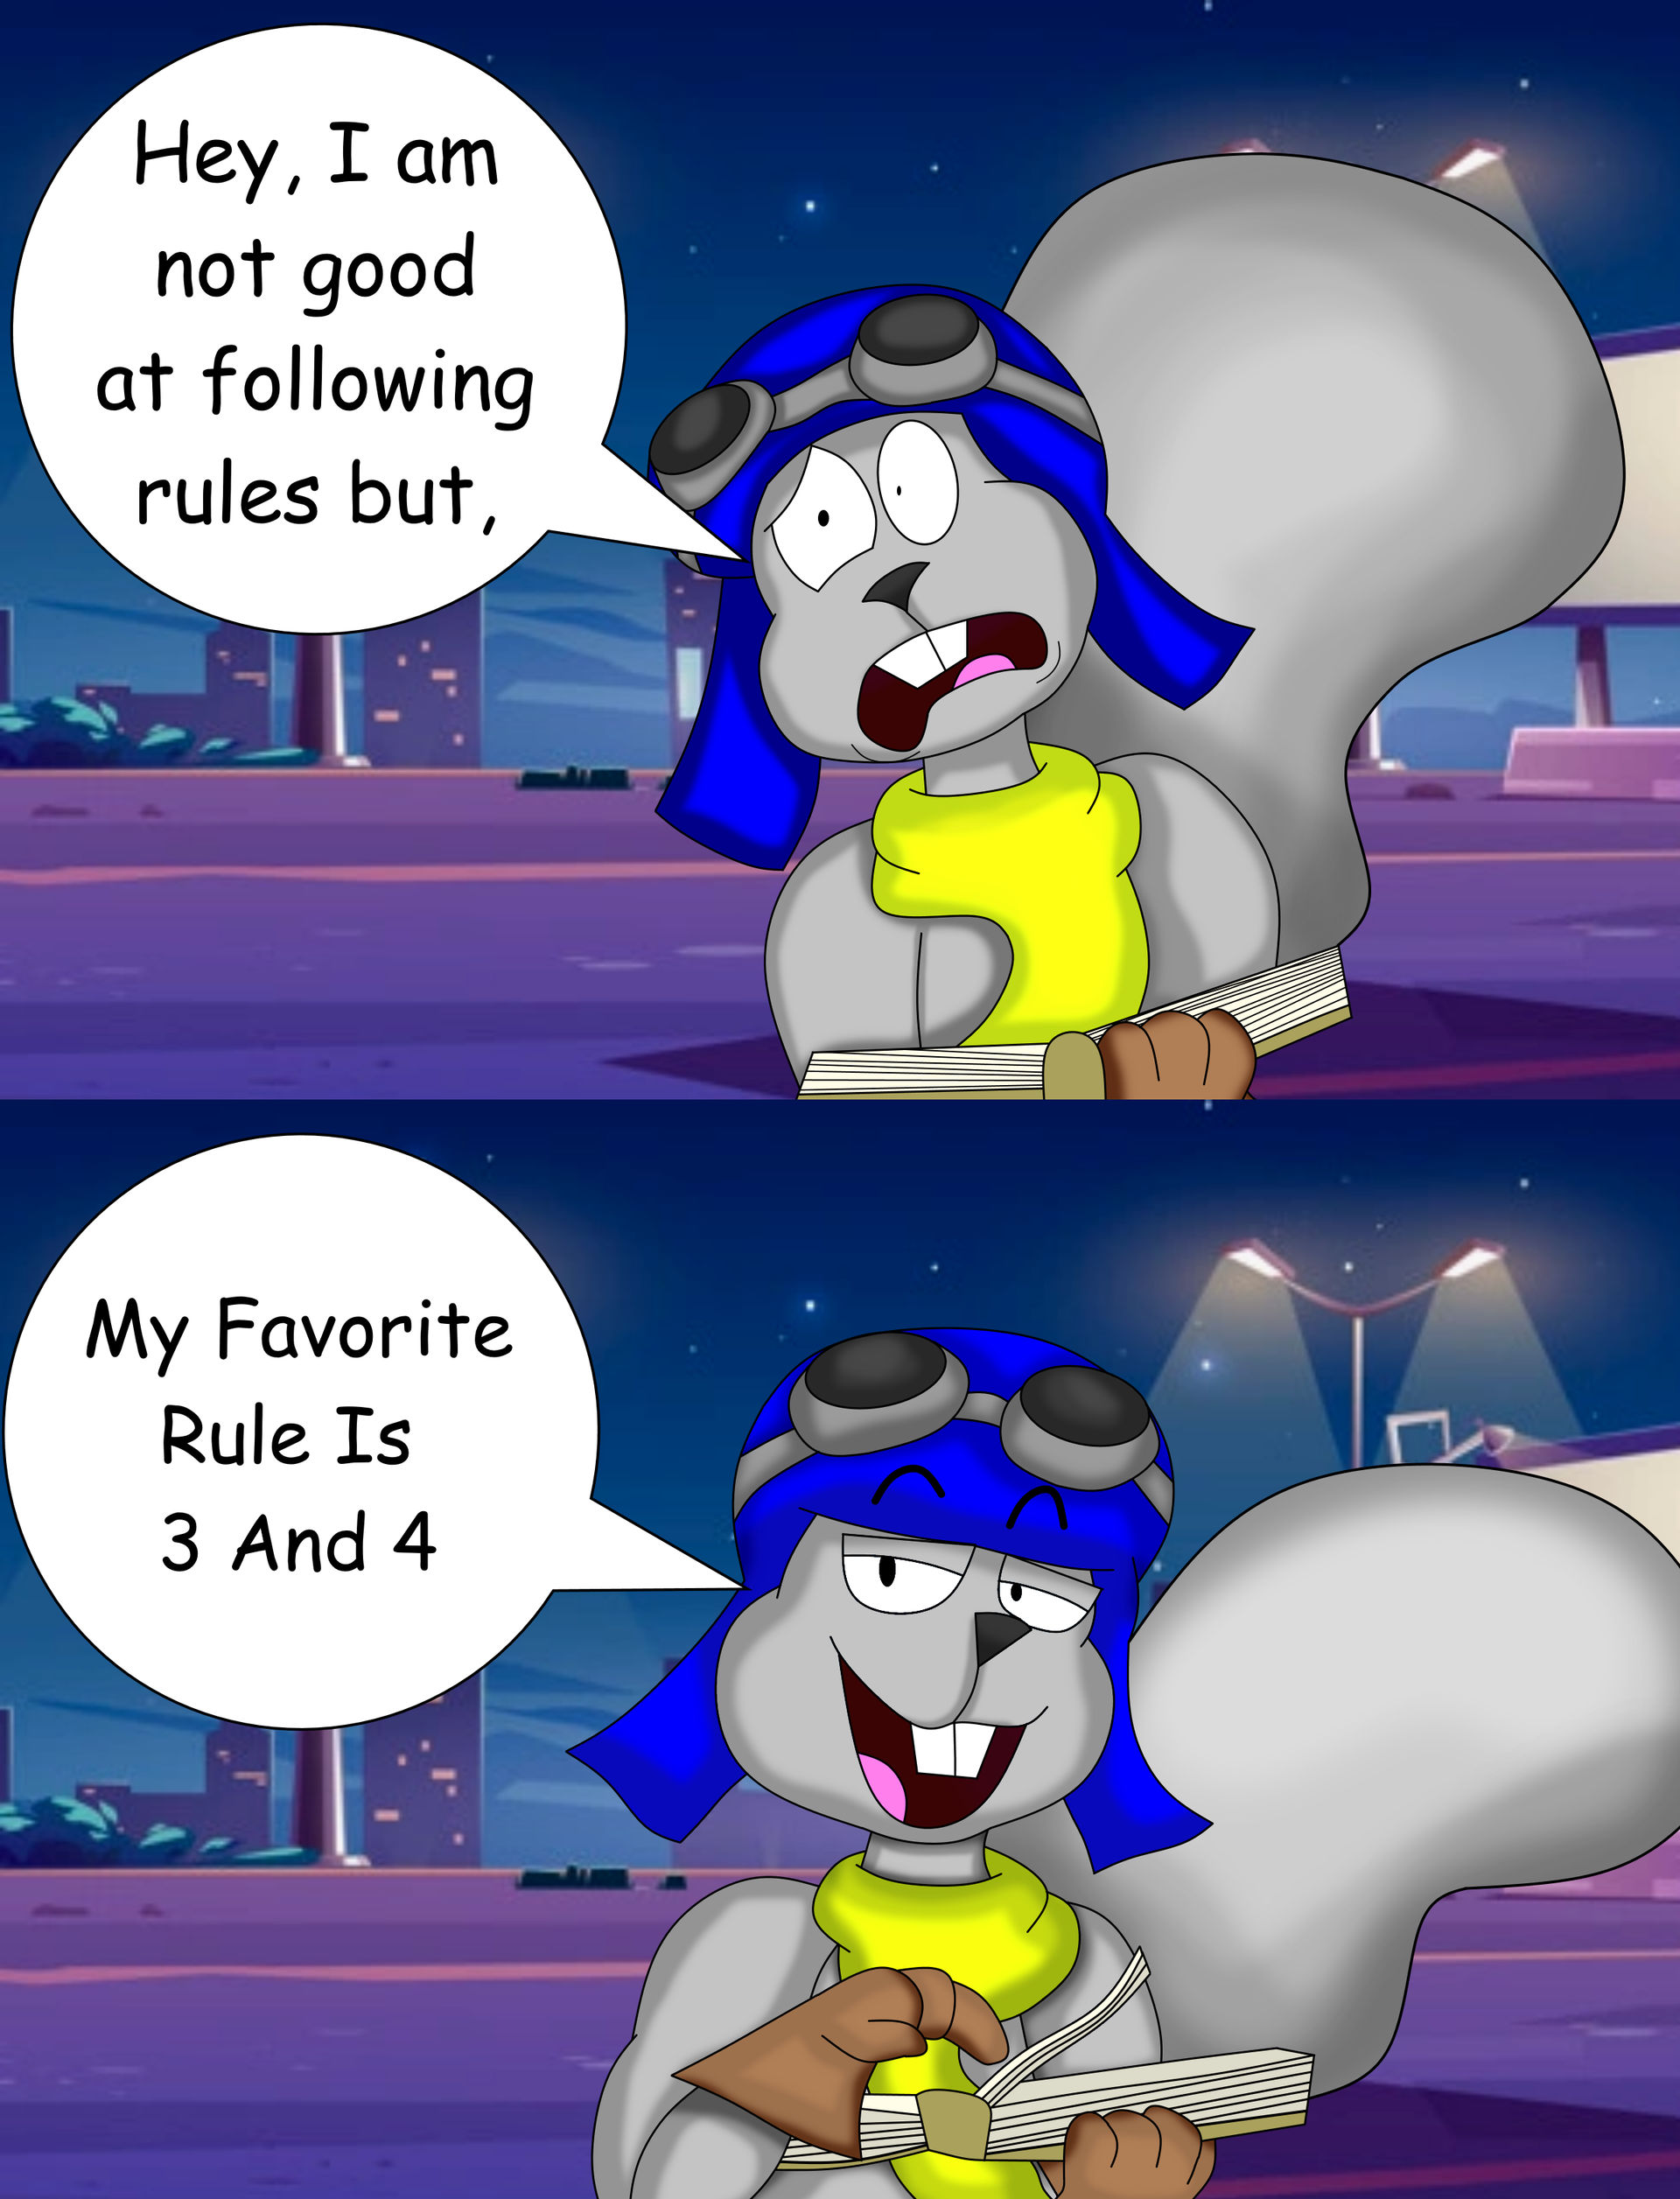 Favourite Game Meme (Some Explanations in Desc.) by YellGal00 on DeviantArt